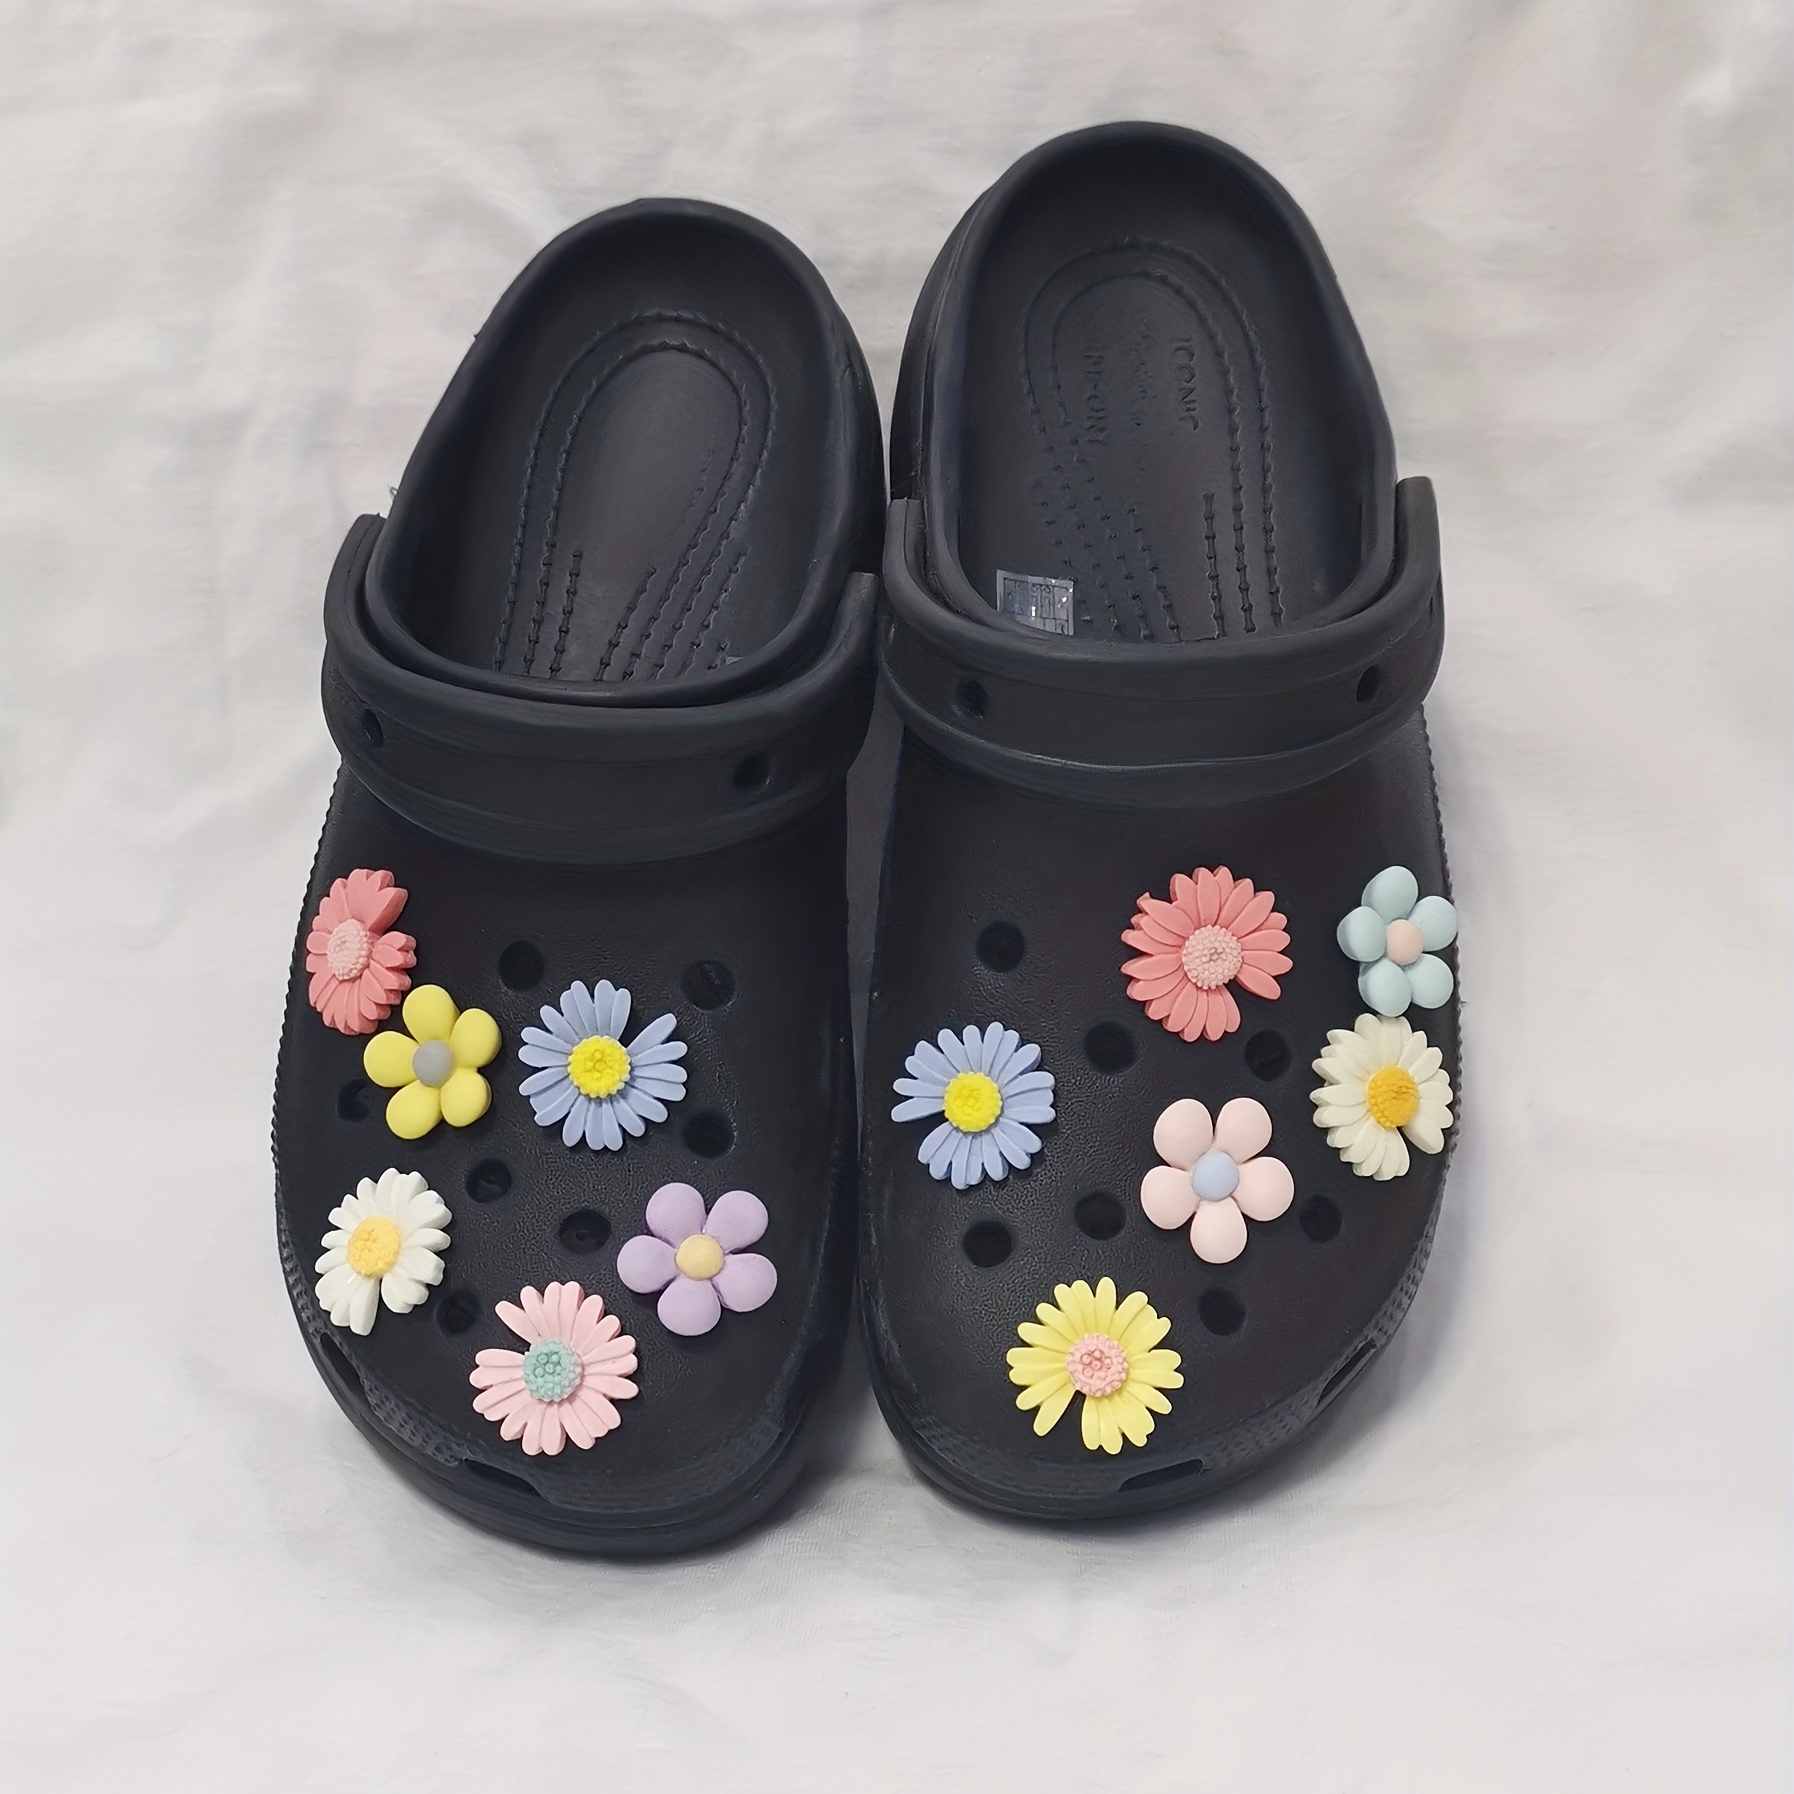 1set Cute Flower Shoe Charms For Girls, Kawaii Croc Charms With Shoe  Chains, Women Girls Shoe Accessories, Decoration Charms For Clog Slippers